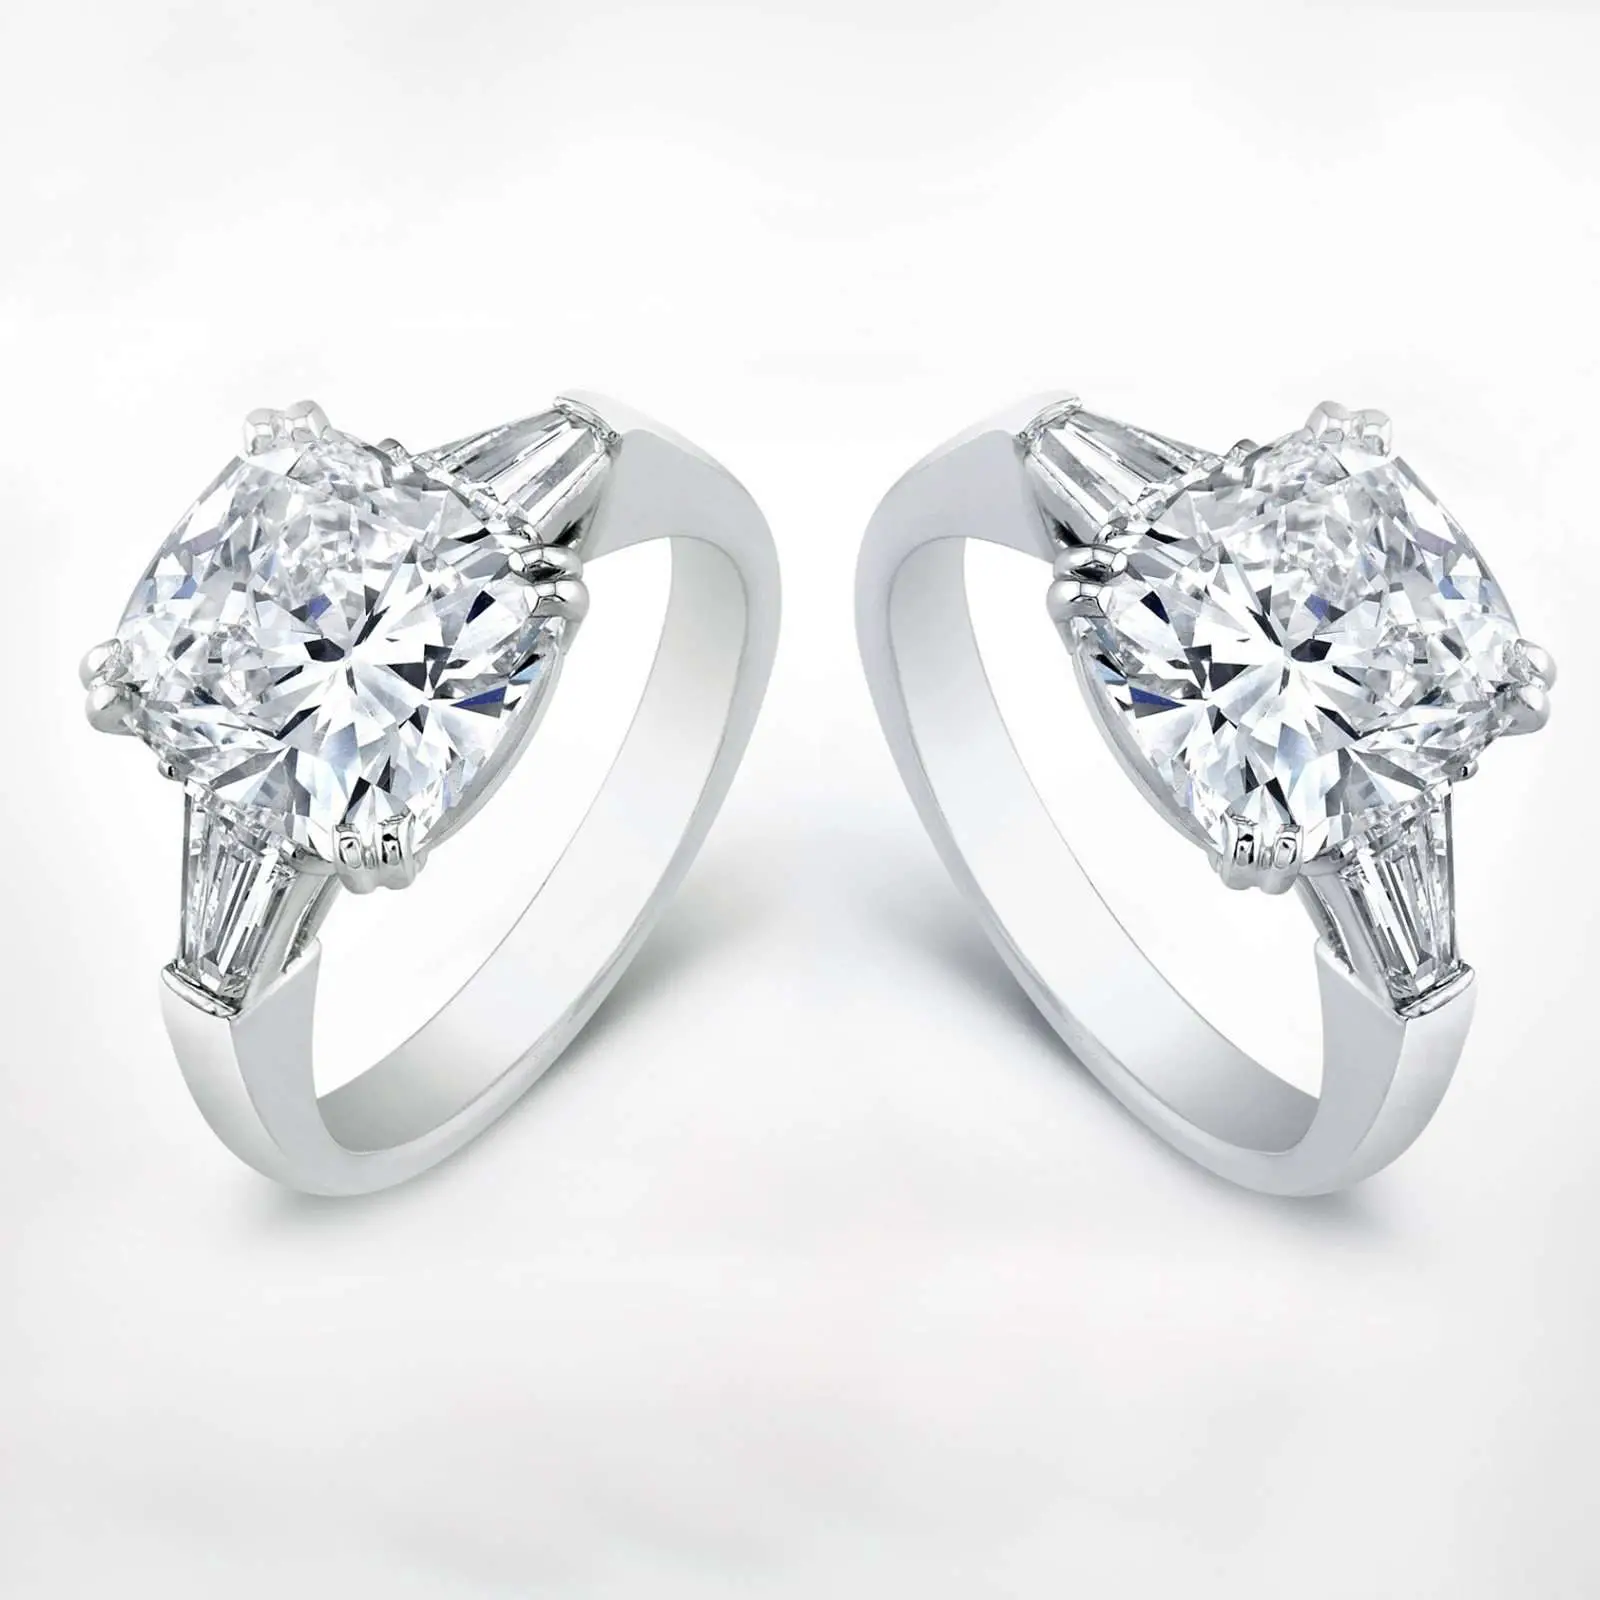 White Gold or Platinum, Which is Better?